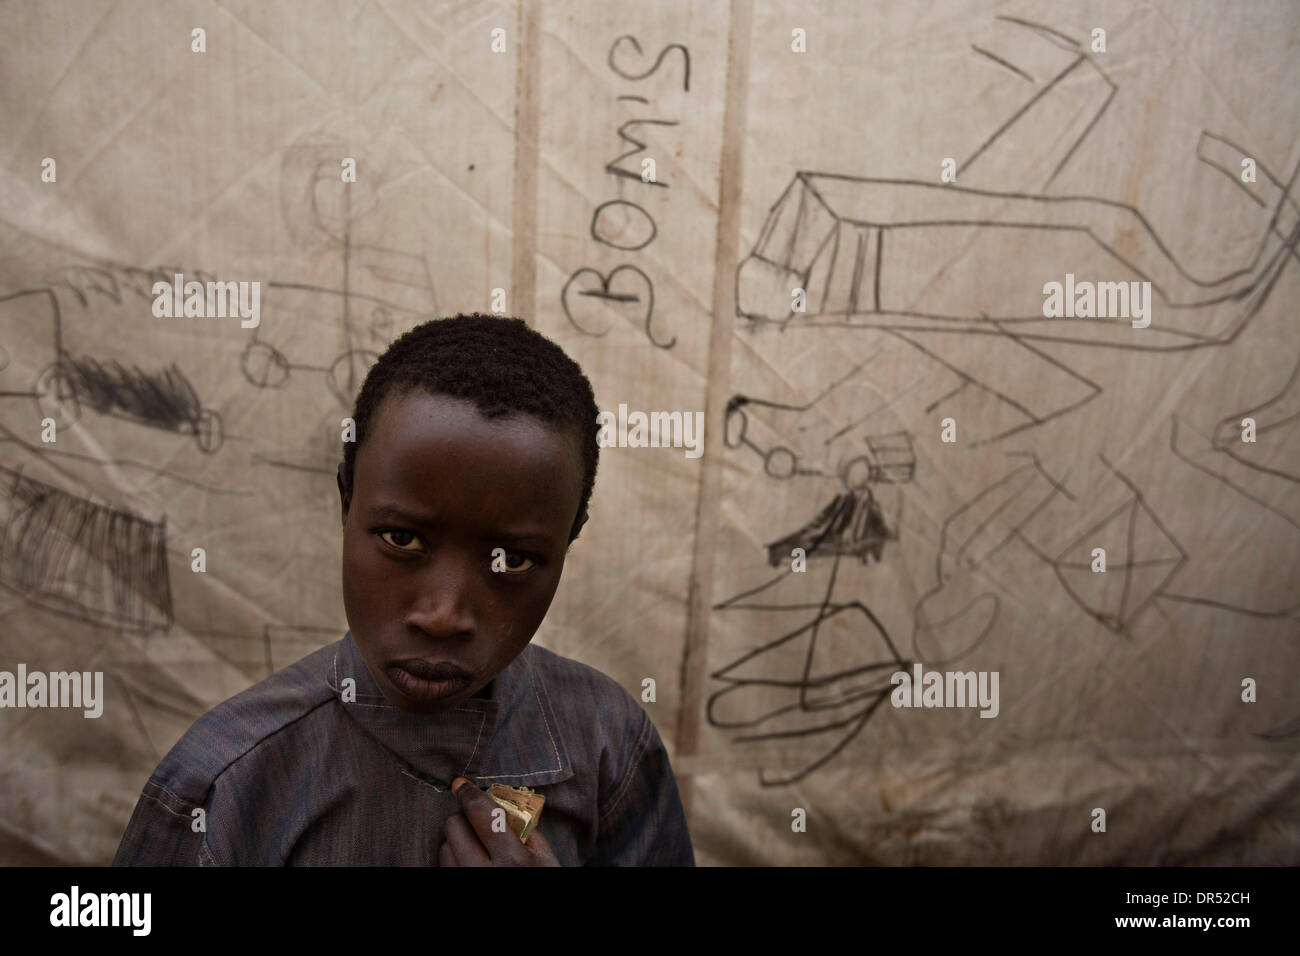 Dec 25, 2008 - Goma, Demoratic Republic of Congo - A displaced Congolese child stands in front of a drawing of airplanes bombing a village, on the side of a tent in the Kibati IDP (internally displaced person) camp on Christmas day, Thursday, December 25, 2008. (Credit Image: © T.J. Kirkpatrick/ZUMA Press) Stock Photo